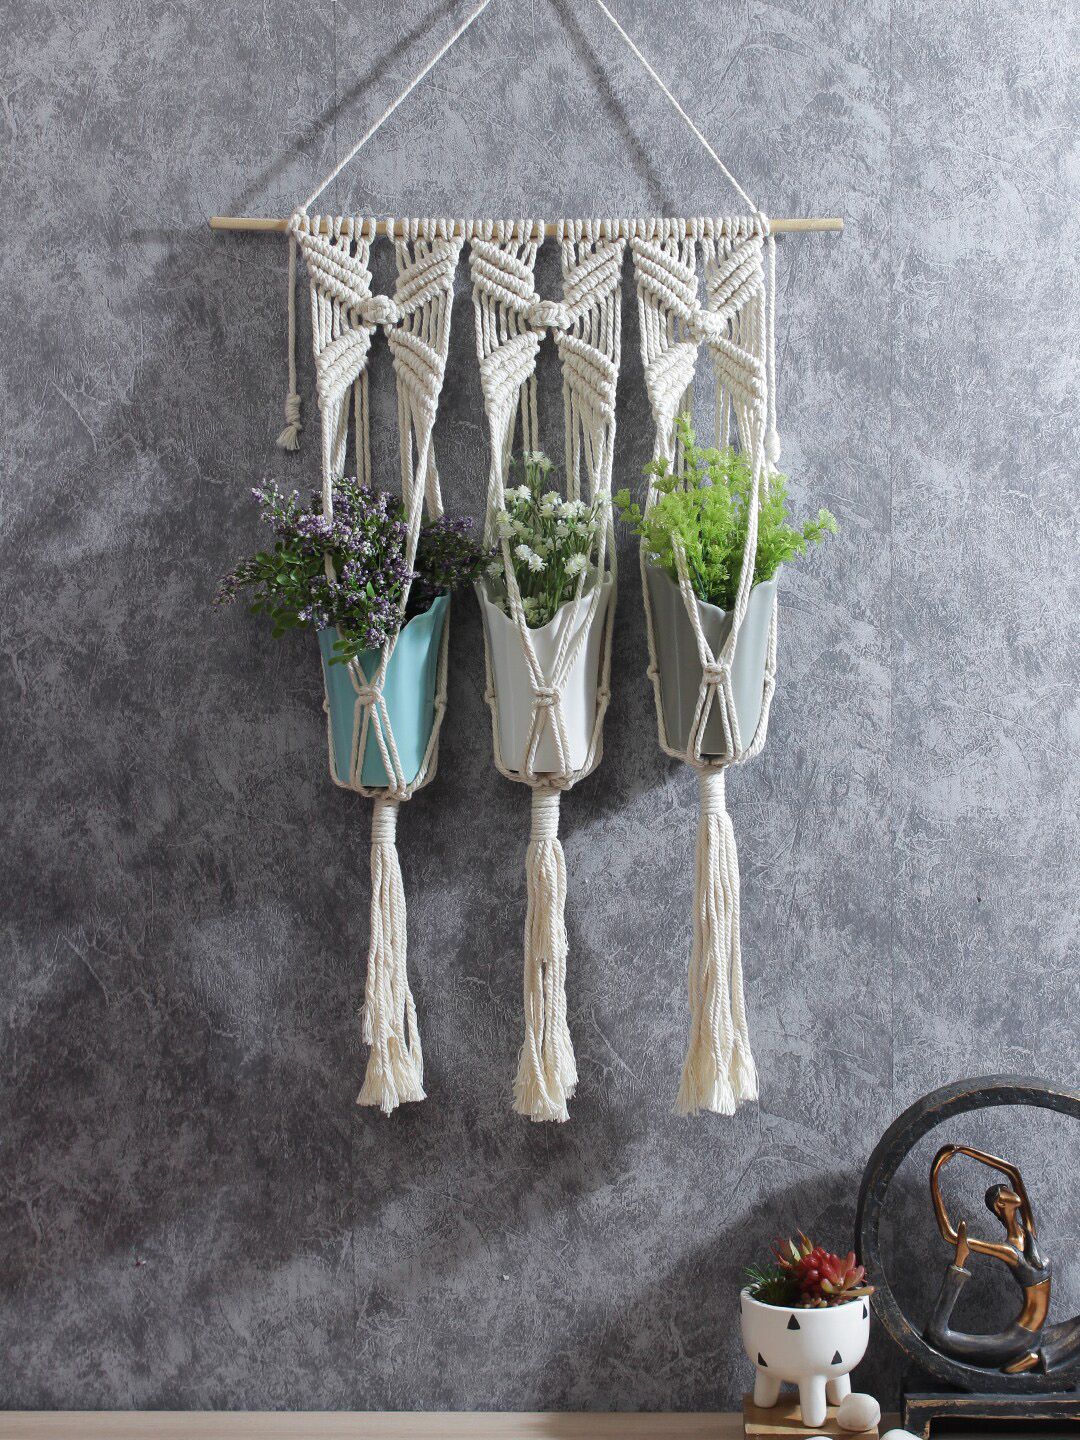 Aapno Rajasthan White Hand Knotted Hanging Wall Decor for 3 Planters Price in India